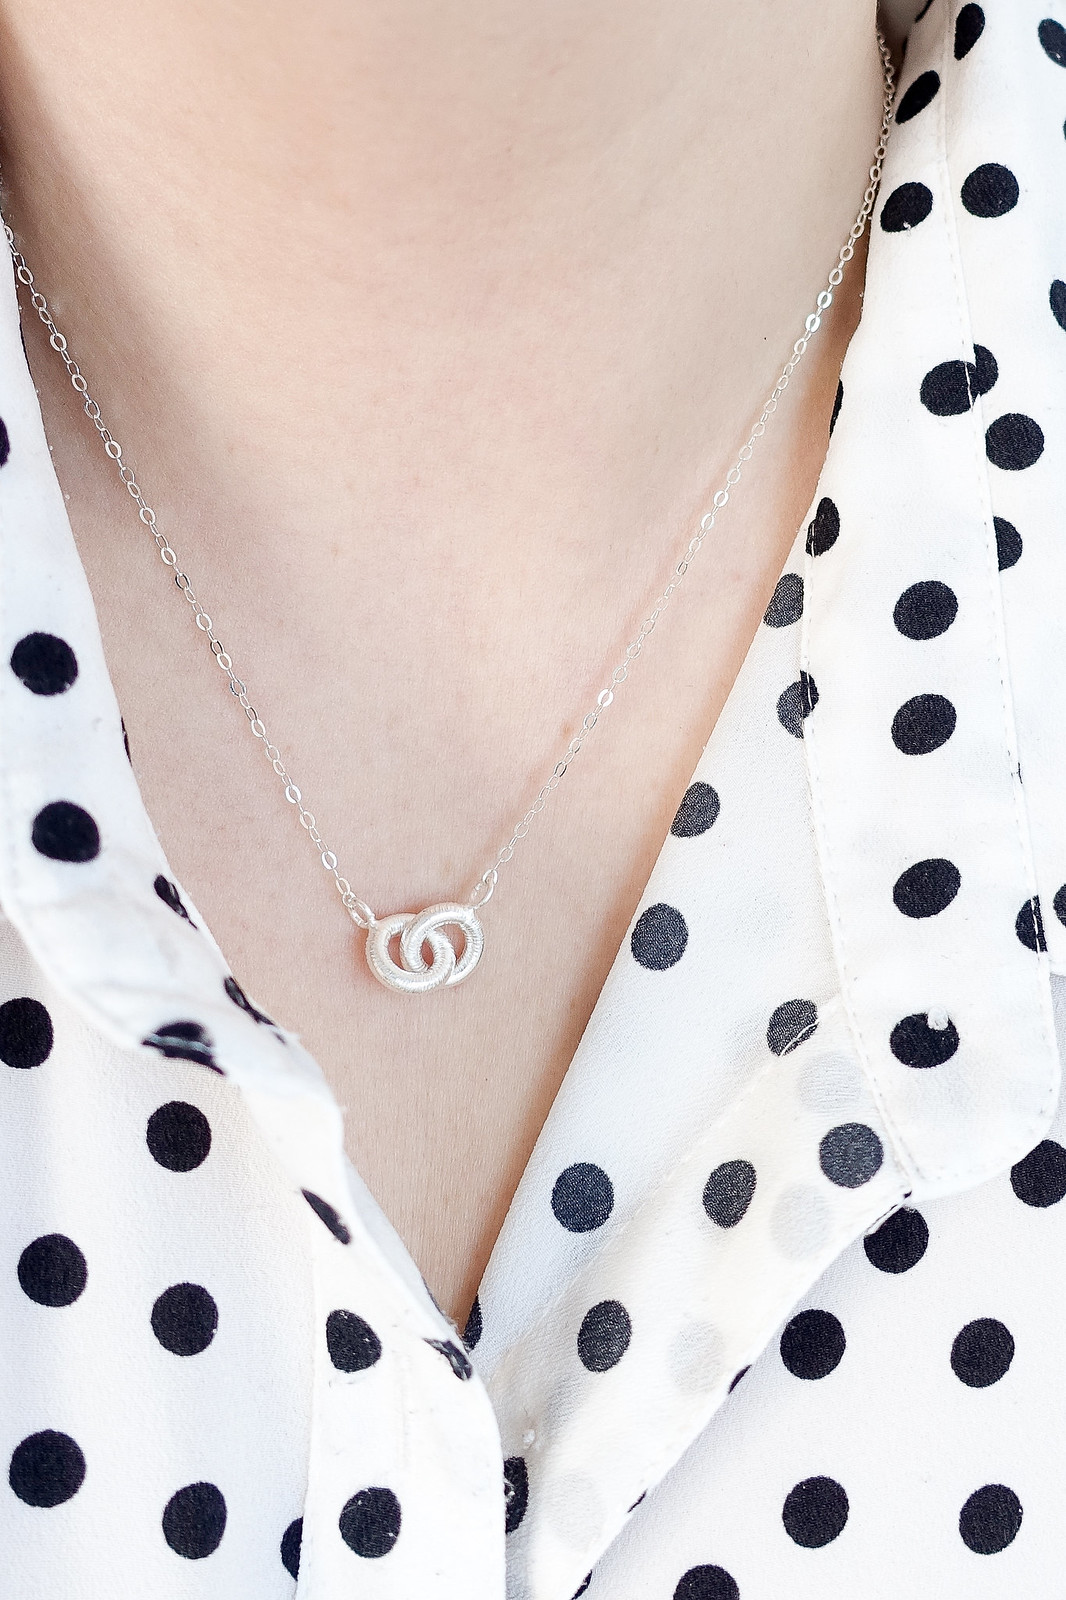 Introducing: The Linked Necklace